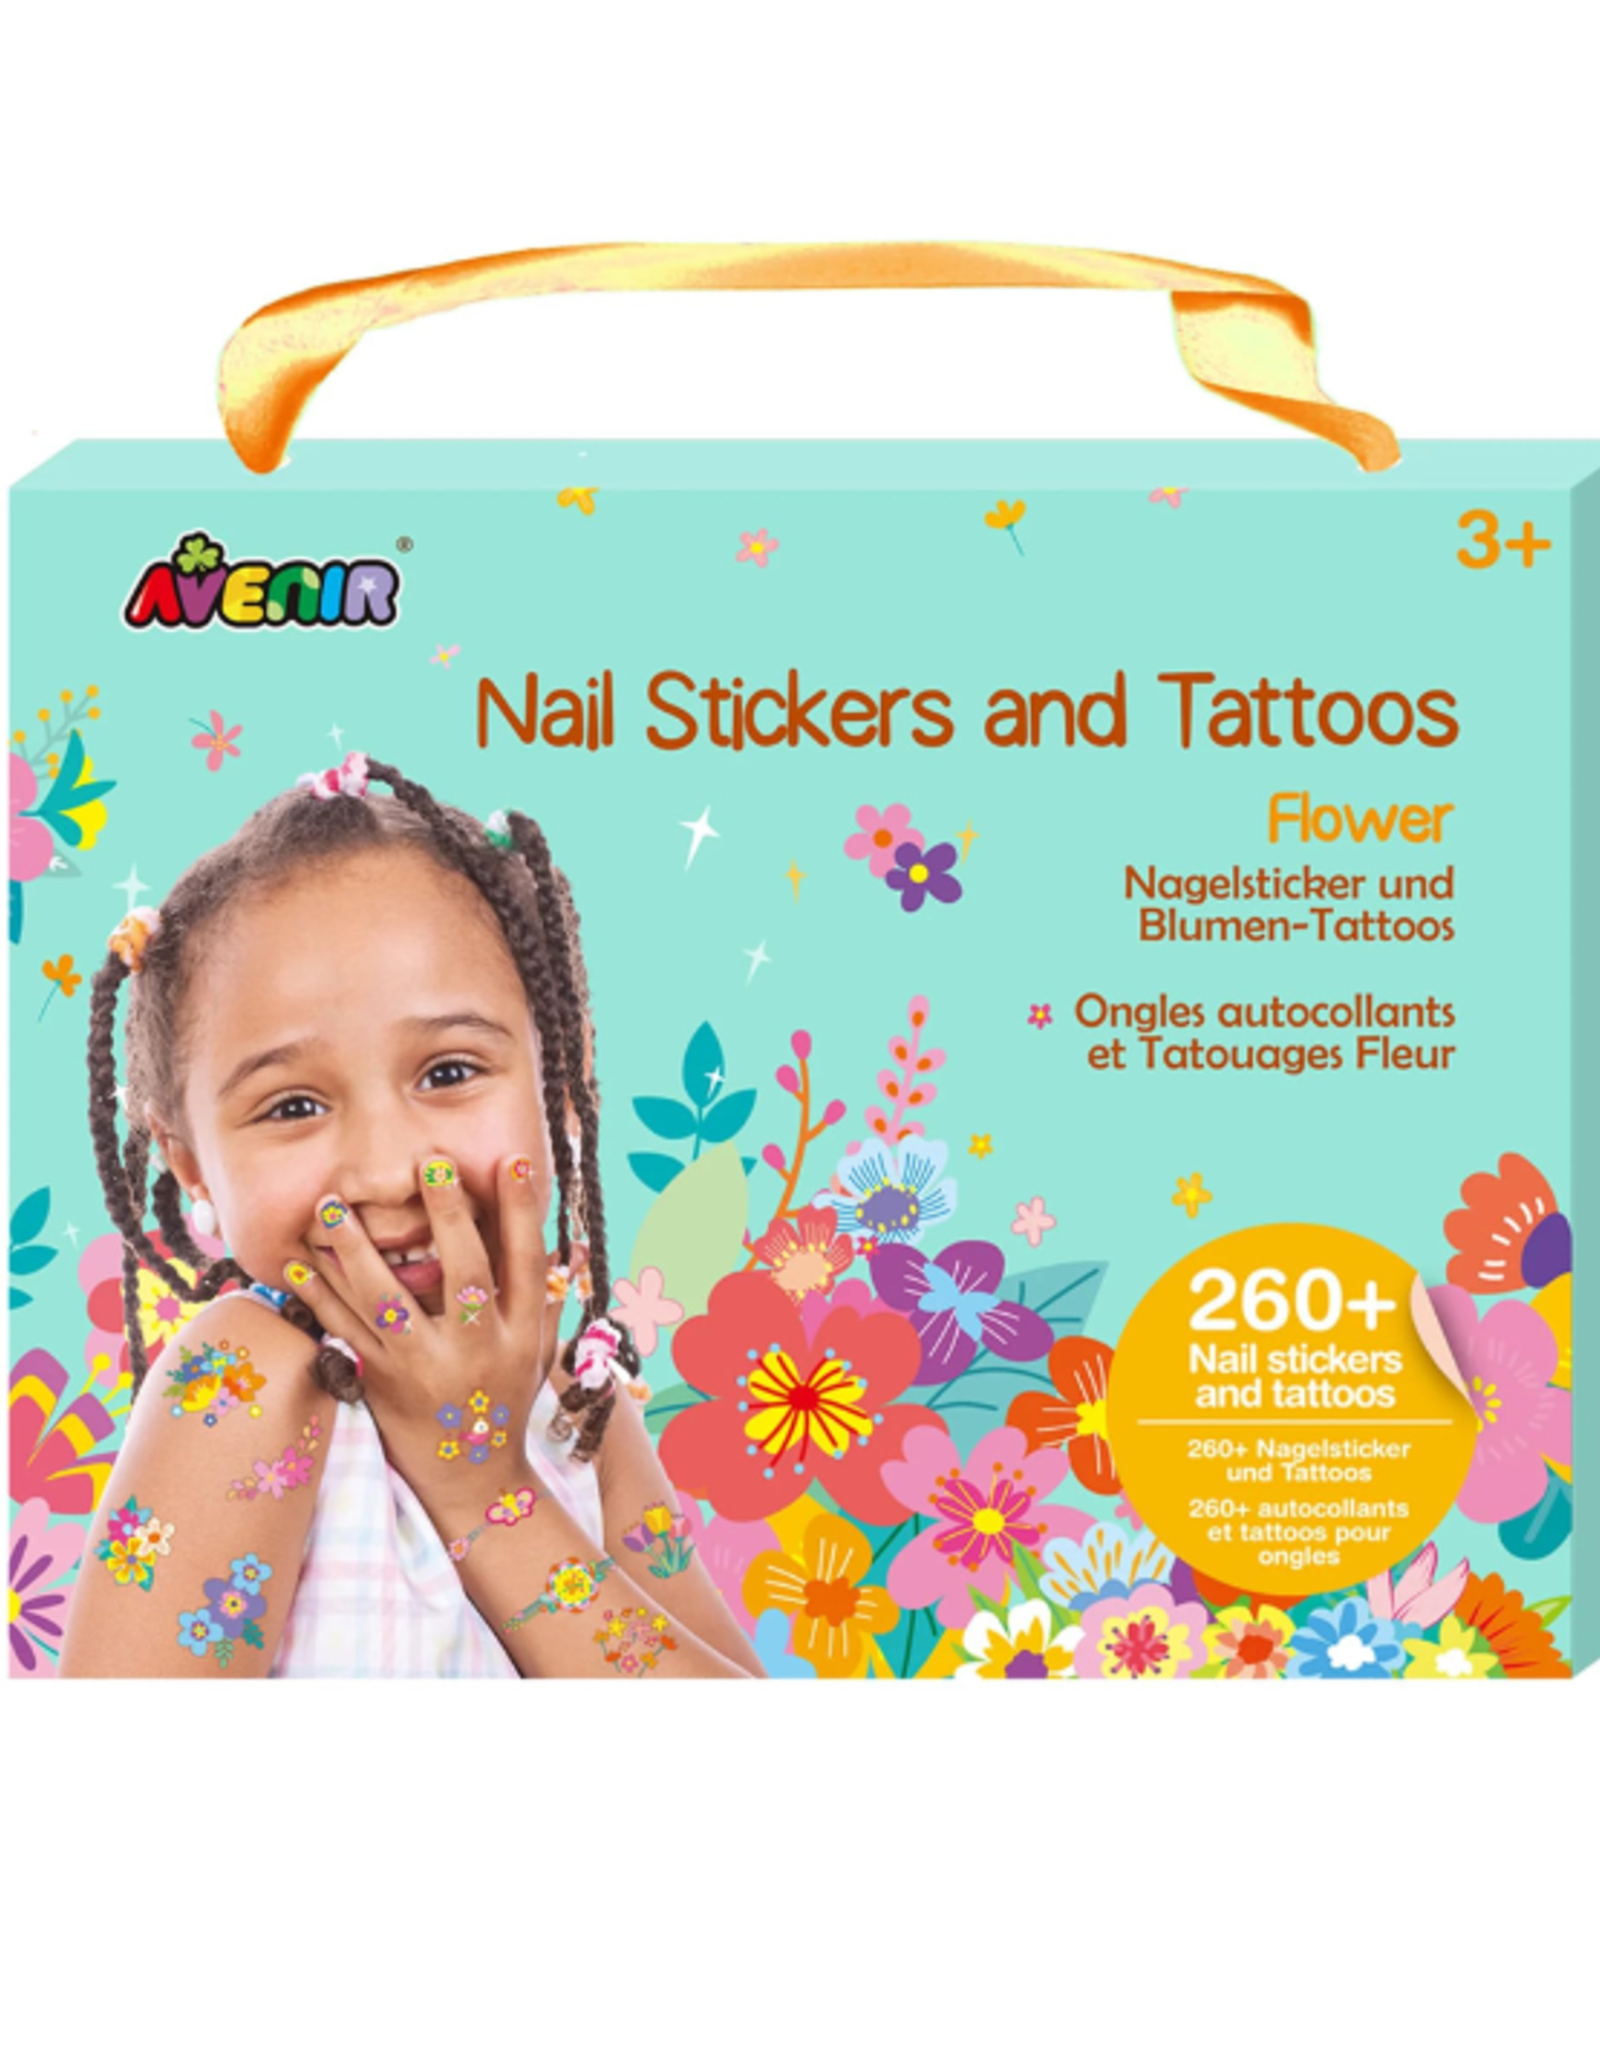 Avenir - Nail Stickers and Tattoos - Flower